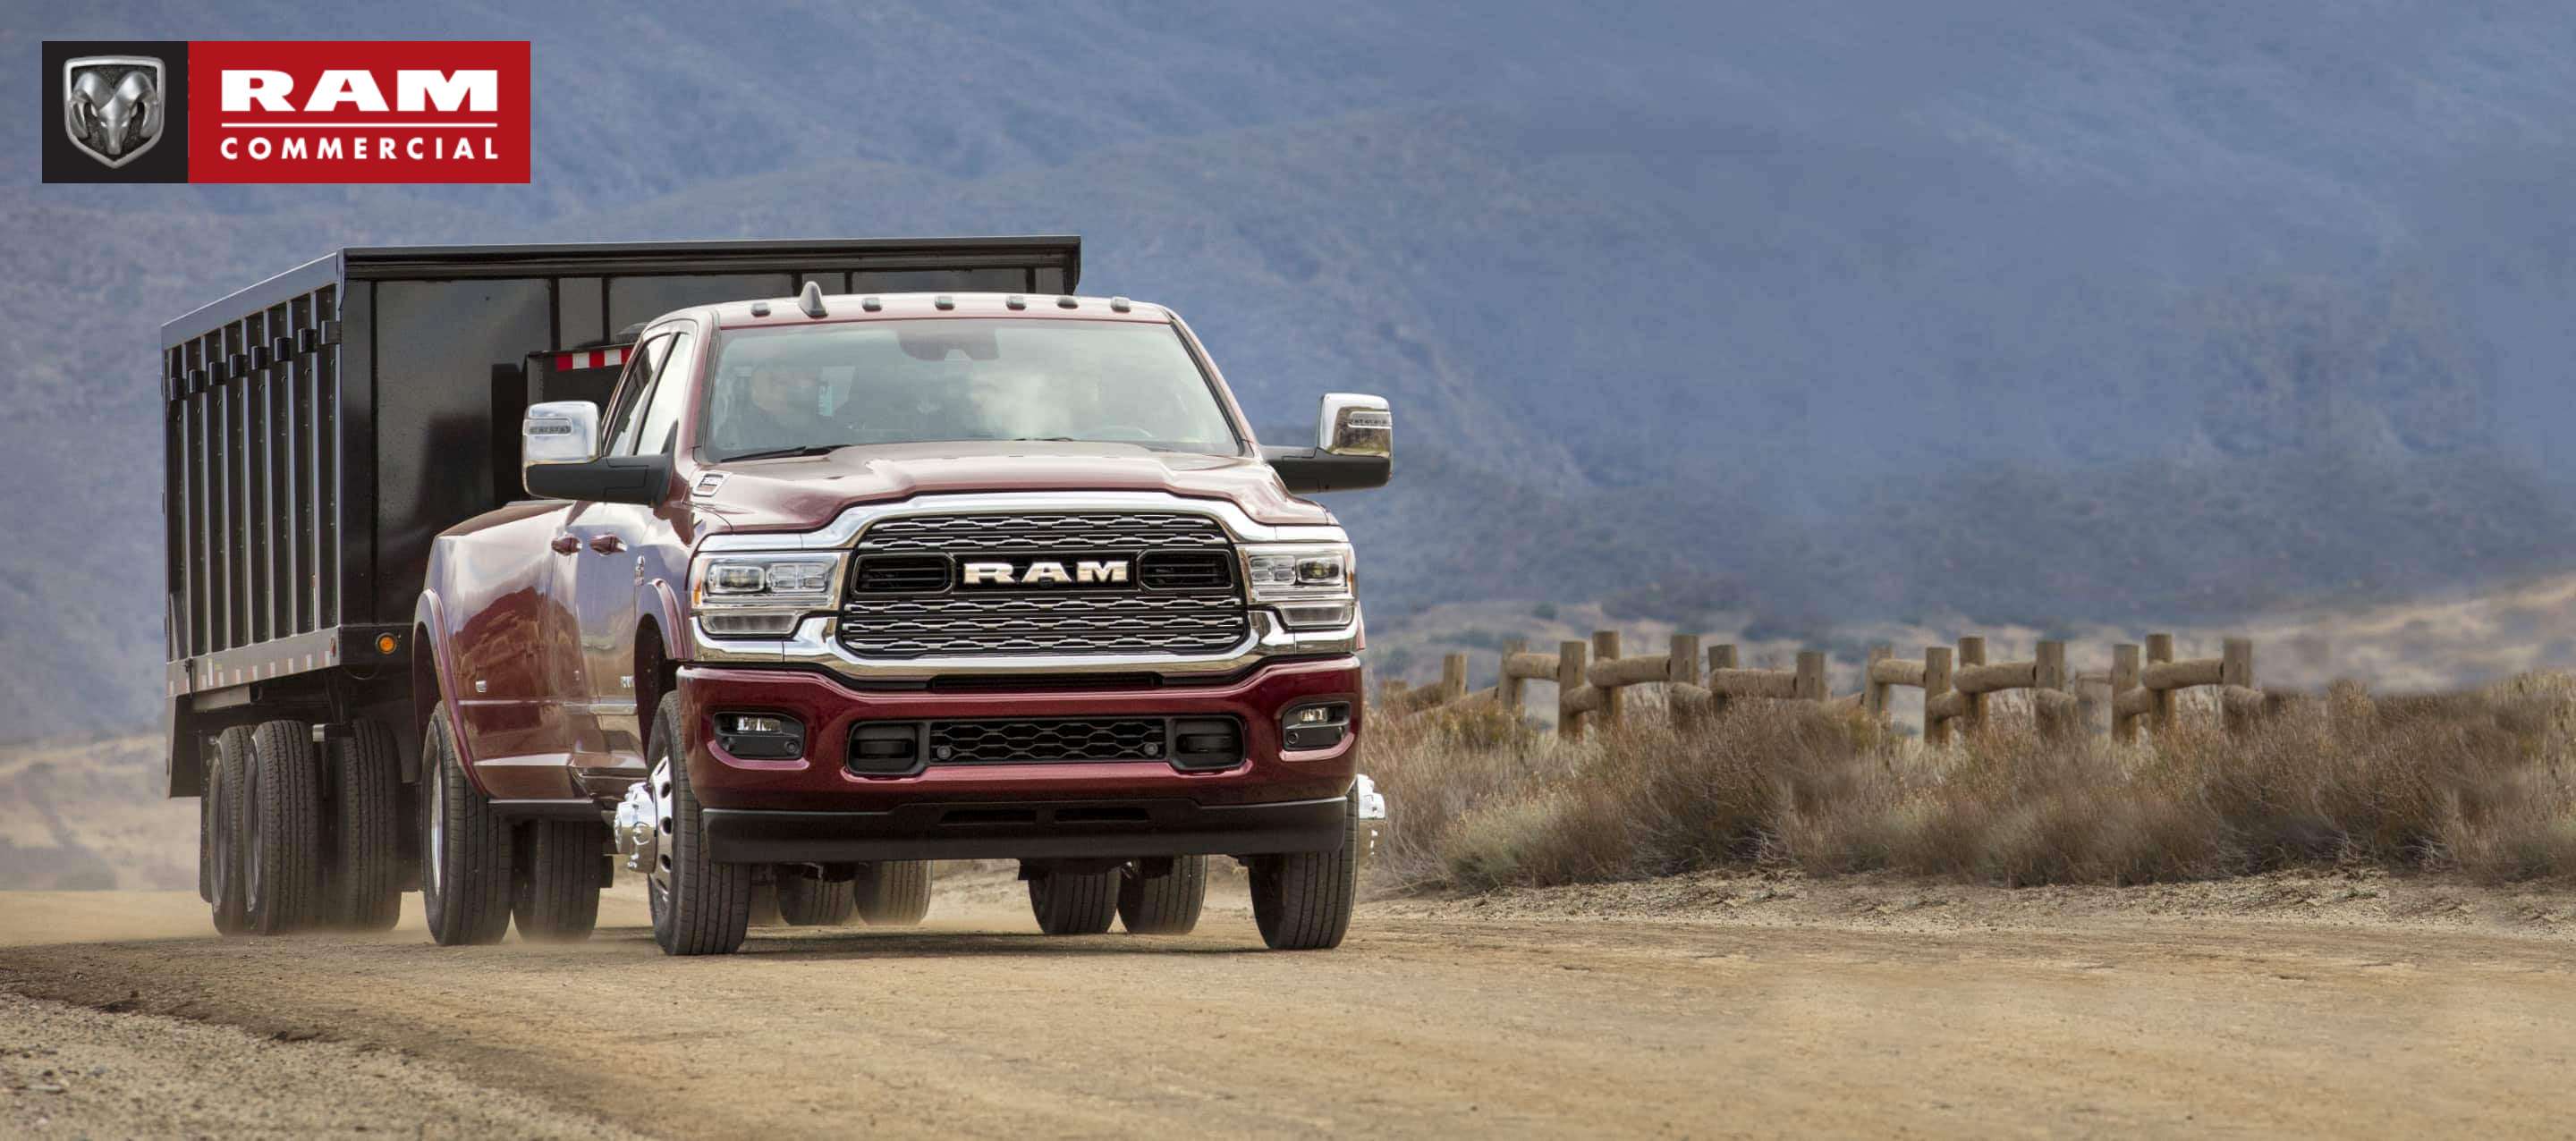 A 2023 Ram 3500 Limited towing a dump body trailer on a dirt road with mountains in the distance. Ram Commercial.